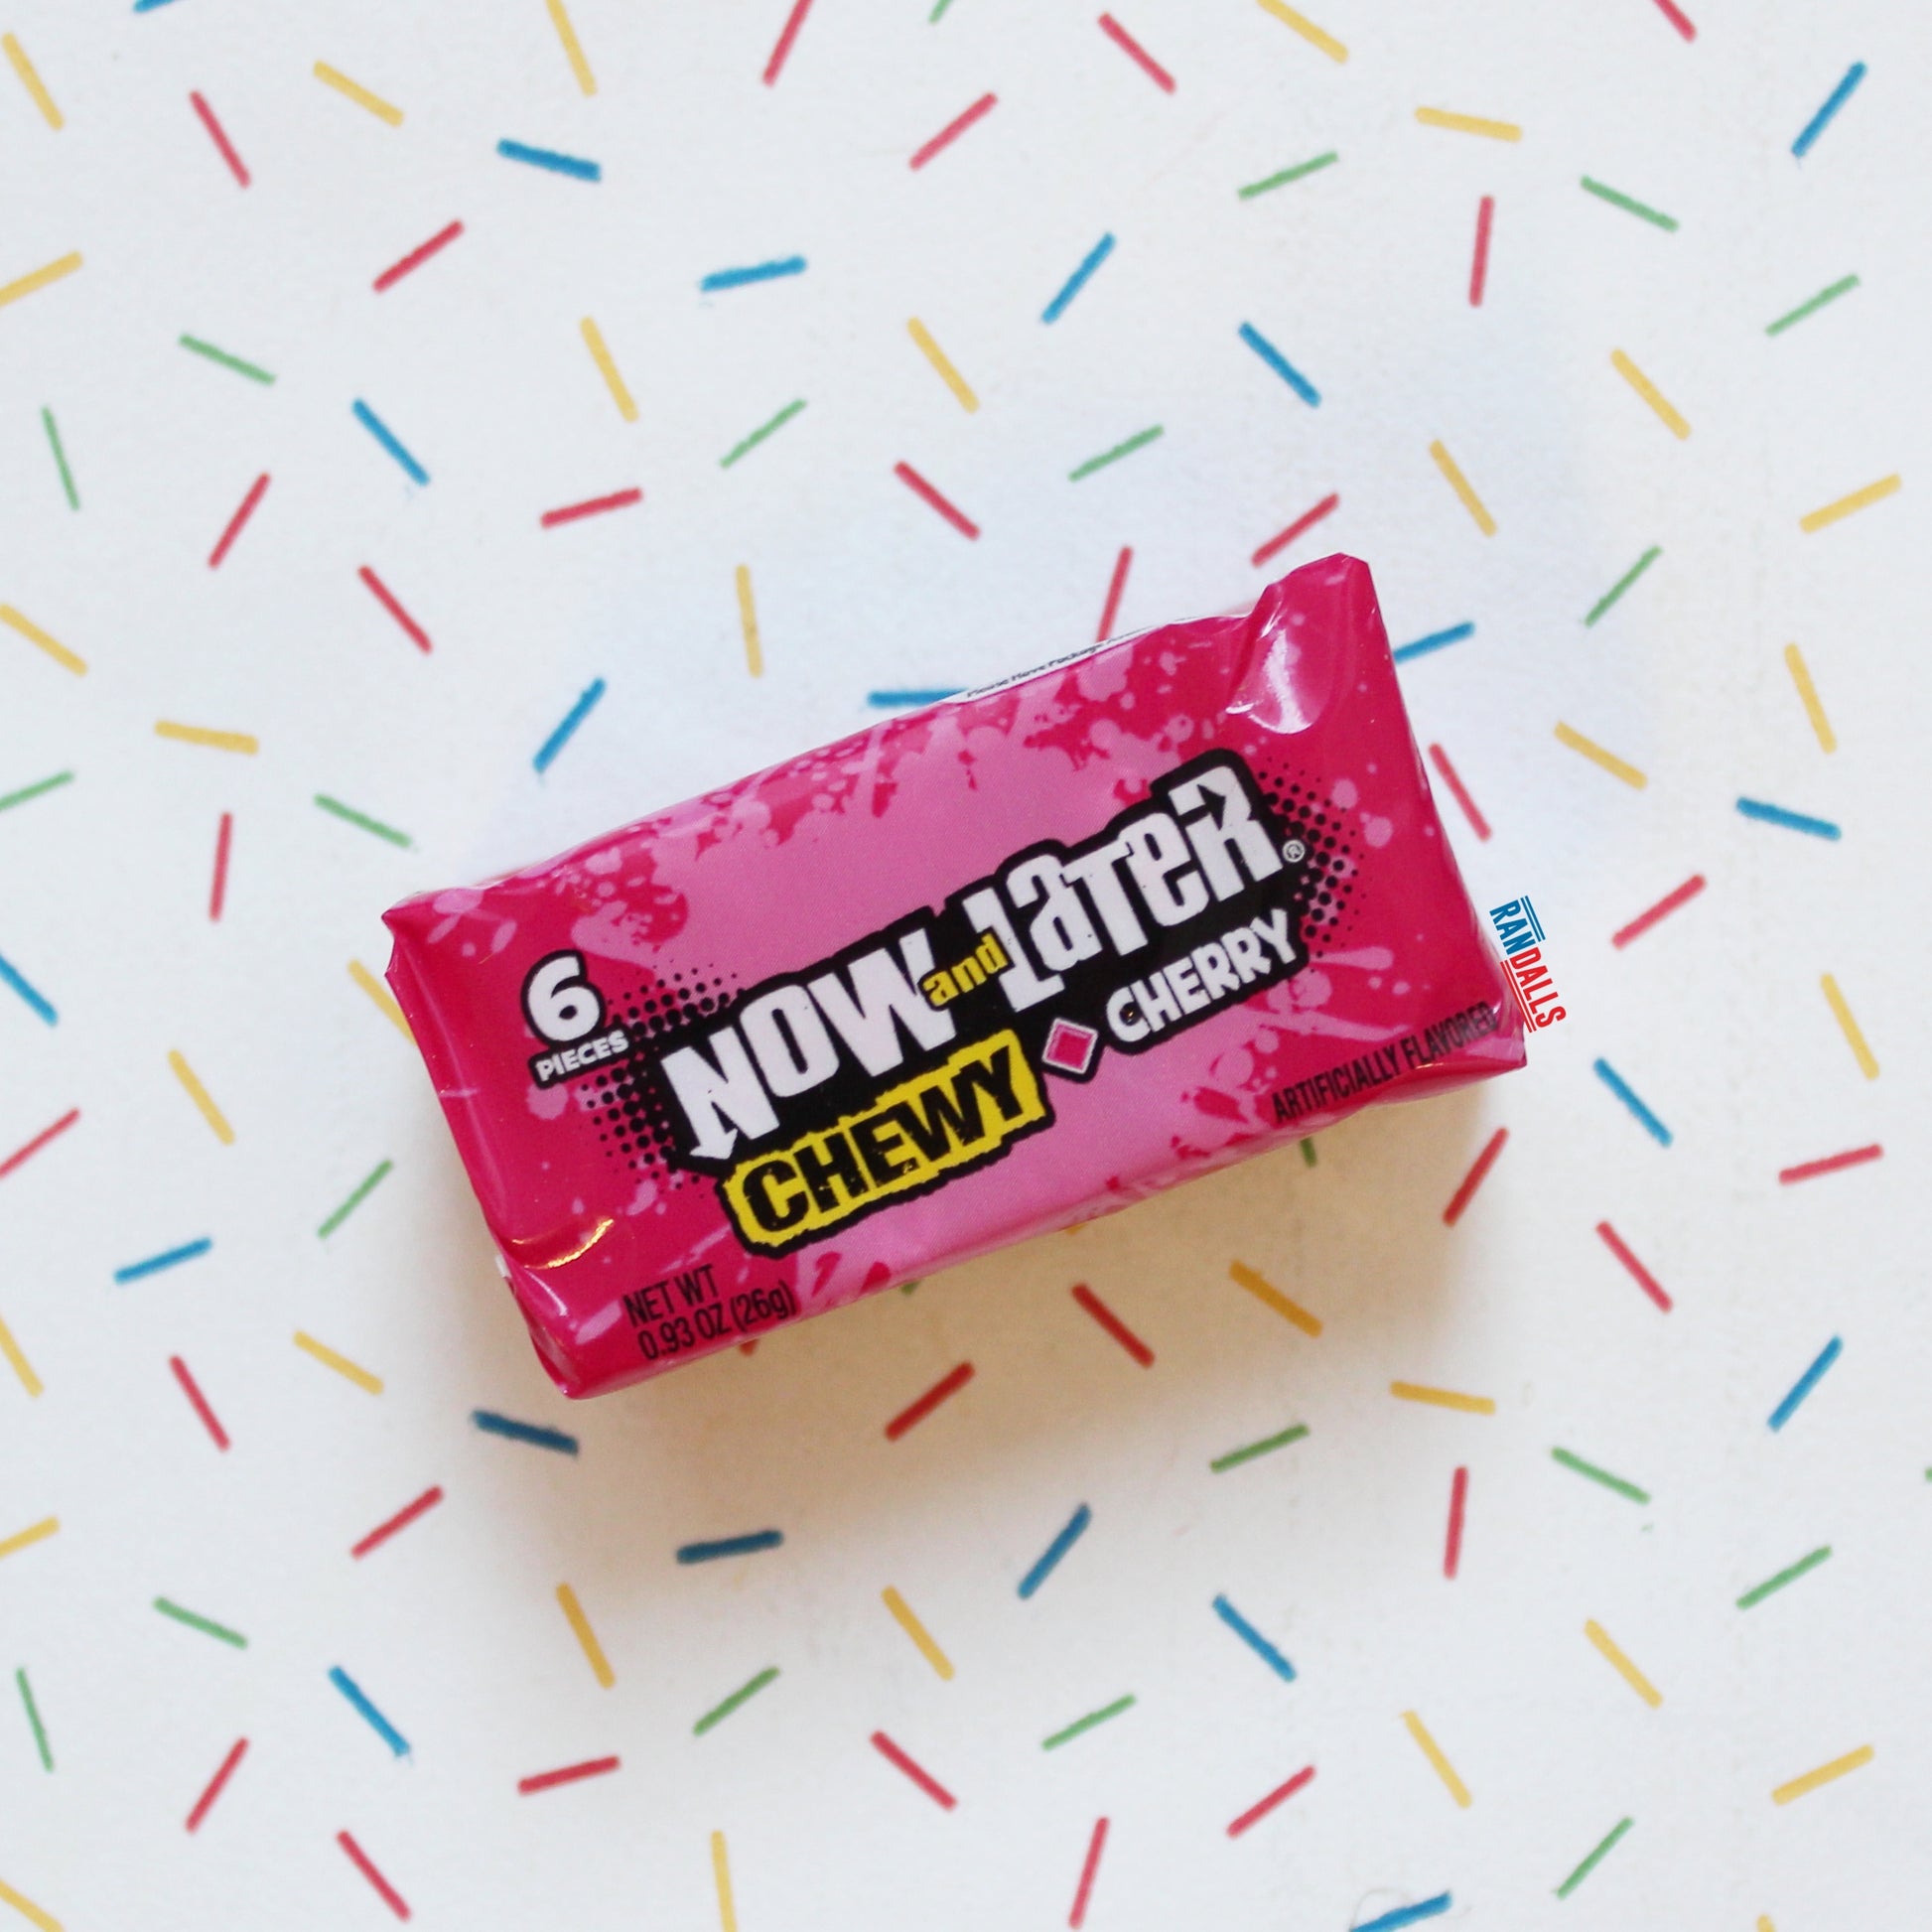 now and later cherry fruit chews, chewy candy, gummy sweets, usa, randalls